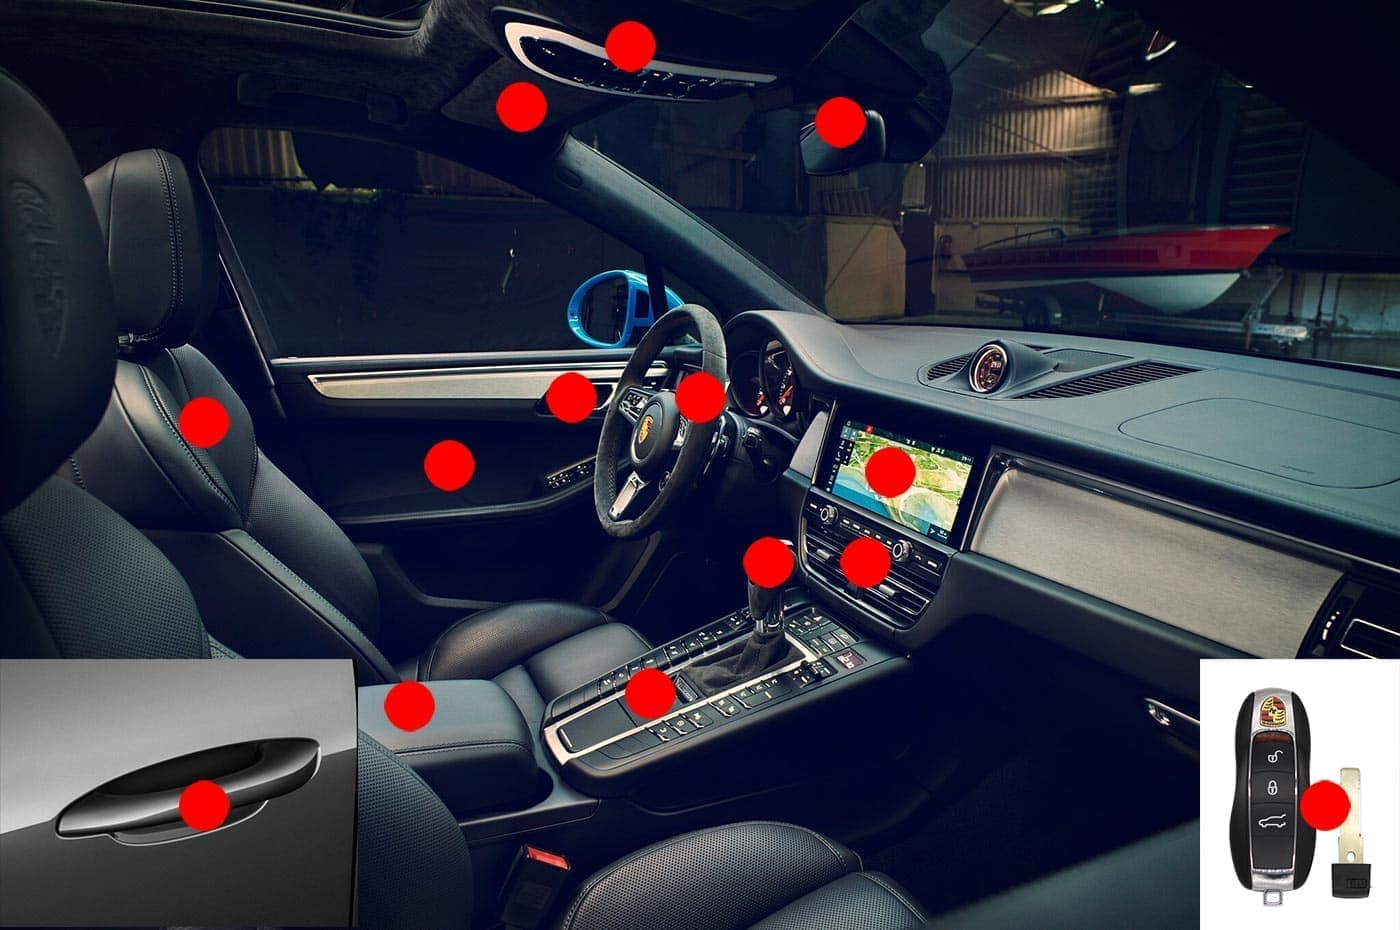 A Porsche's interior with red dots indicating all of the locations they disenfect after service